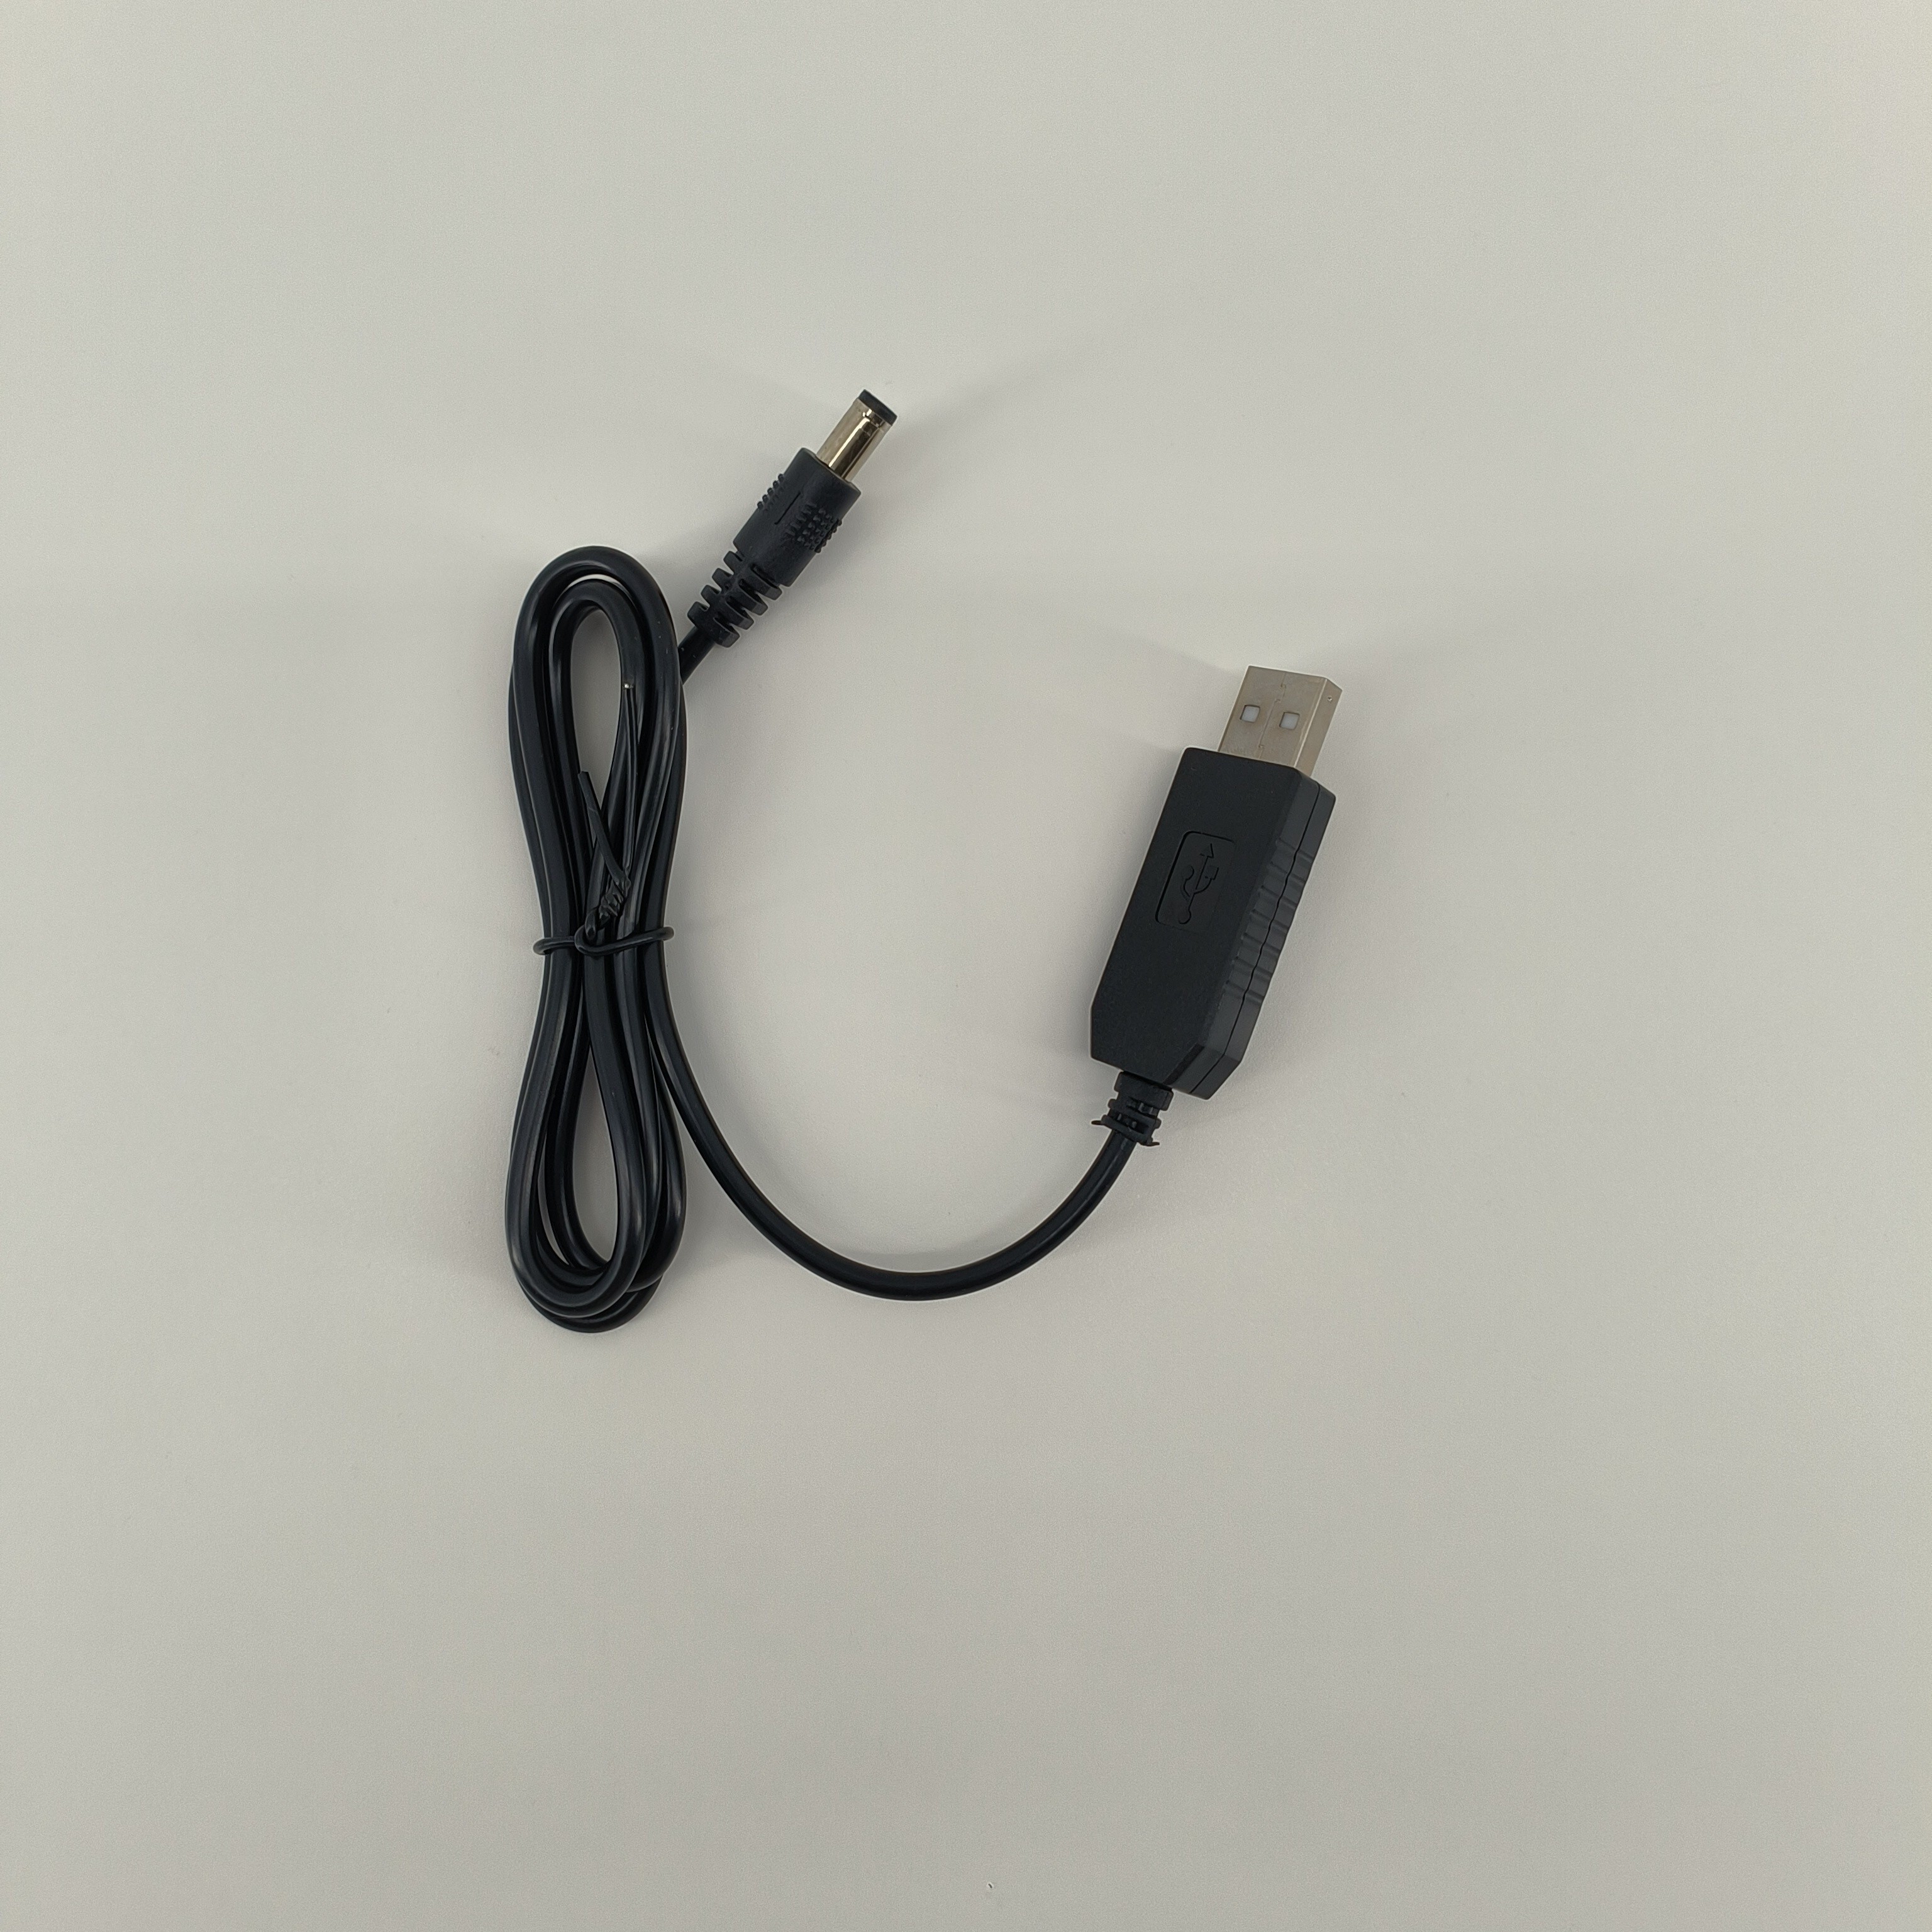 GutReise USB 5V to DC 12V Converter Power Cable + 8 Connectors Adapter USB  to DC Power Cable (Below 2A Max for 8Watts)